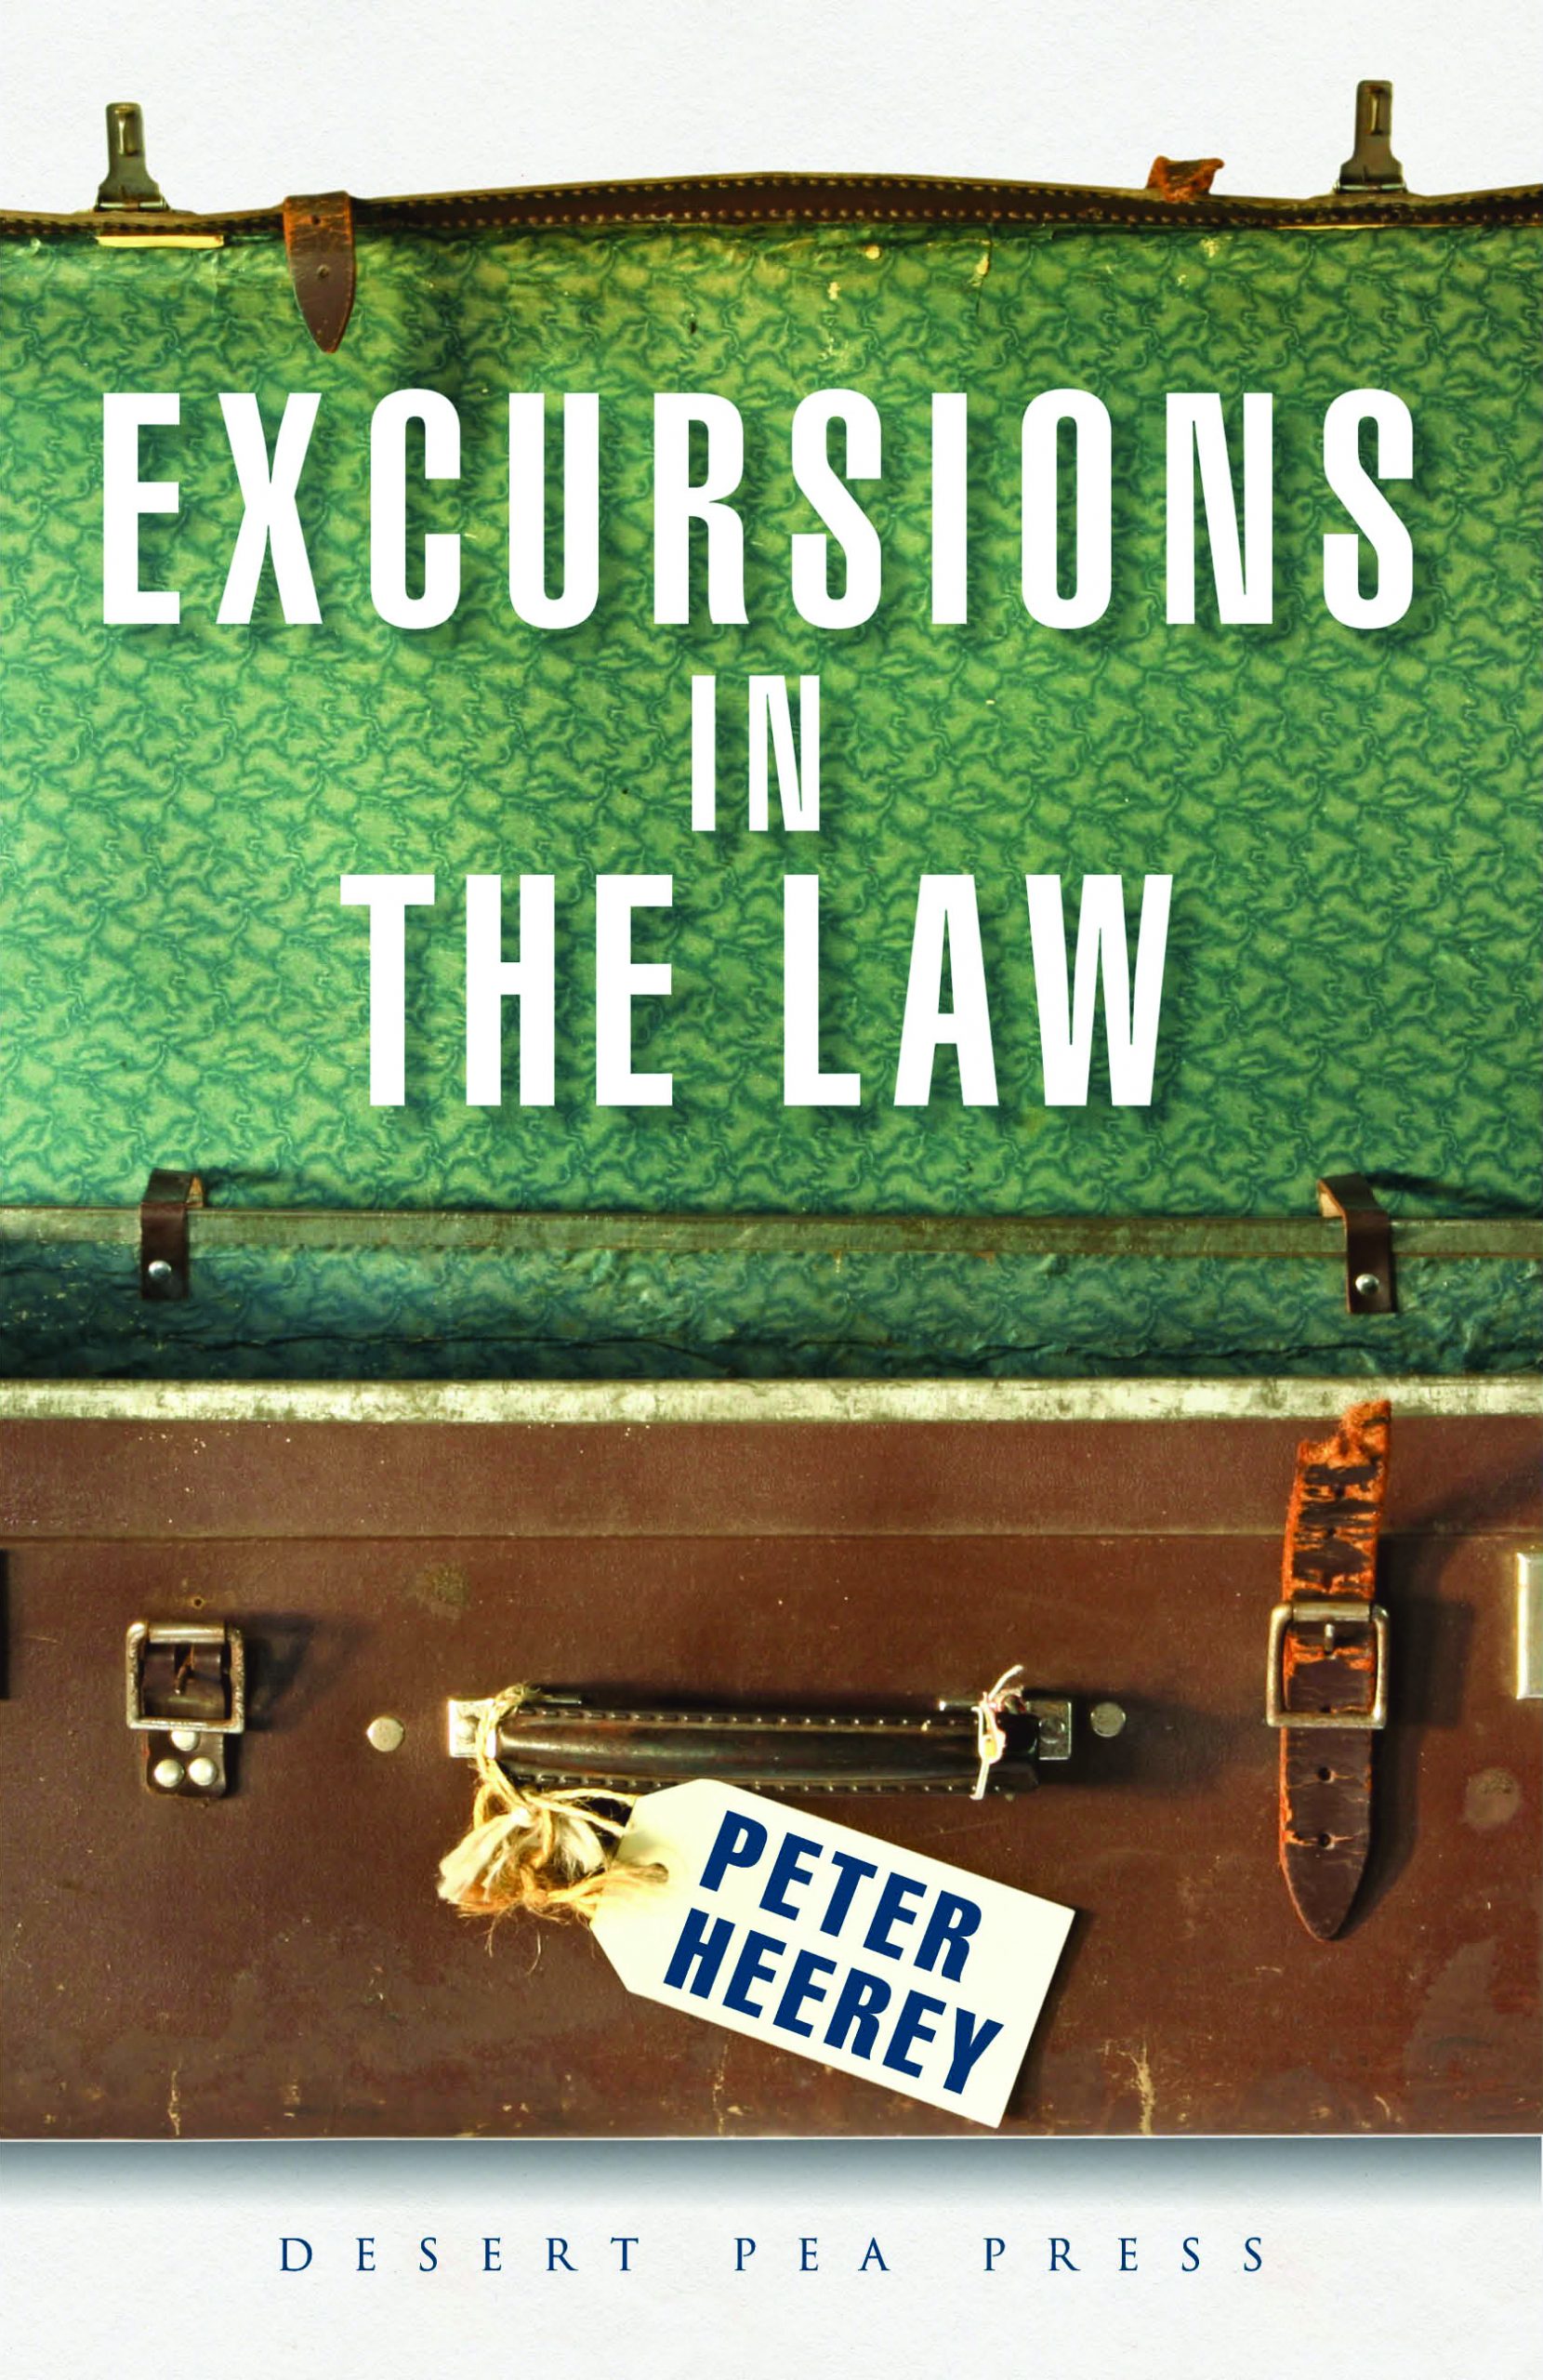 excursion in law definition